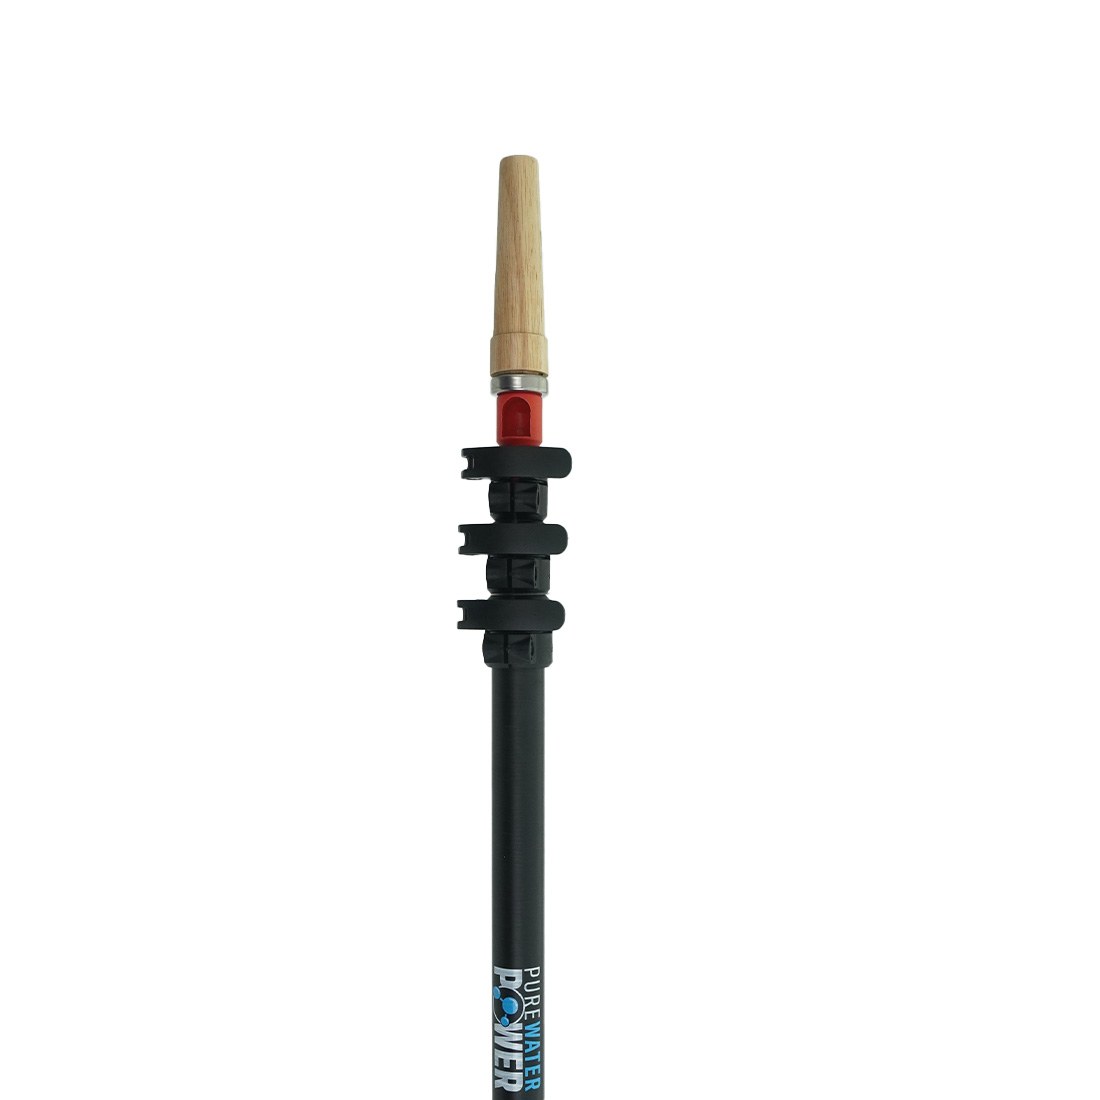 PWP Trad Pole - 7 Foot Tip View